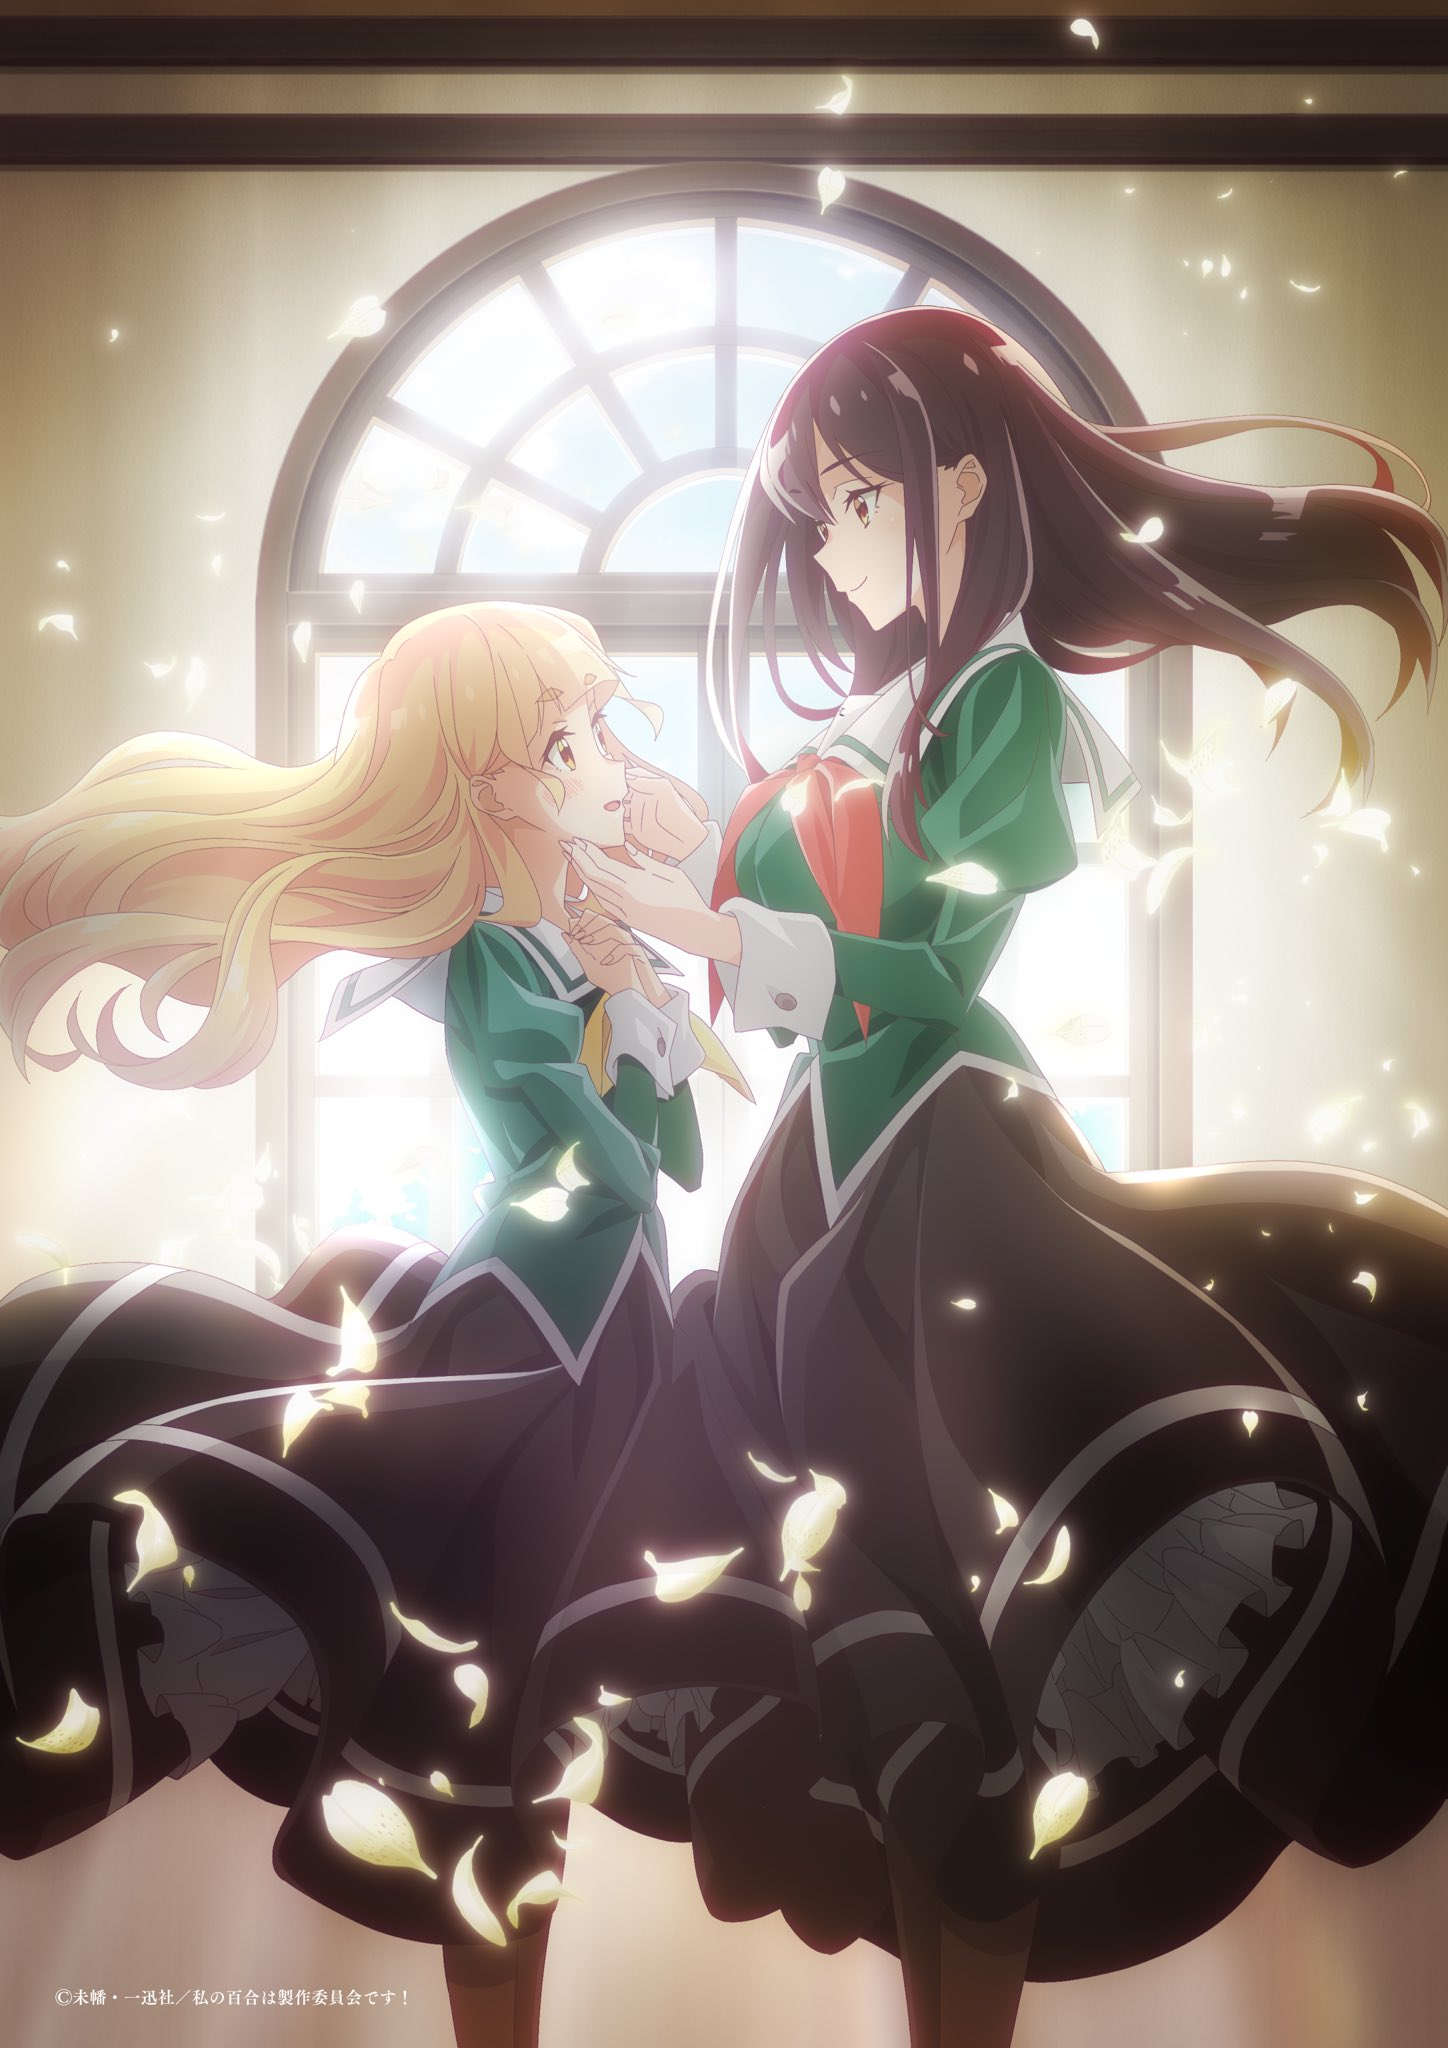 The 12+ Best Yuri Anime Characters You Should Get To Know